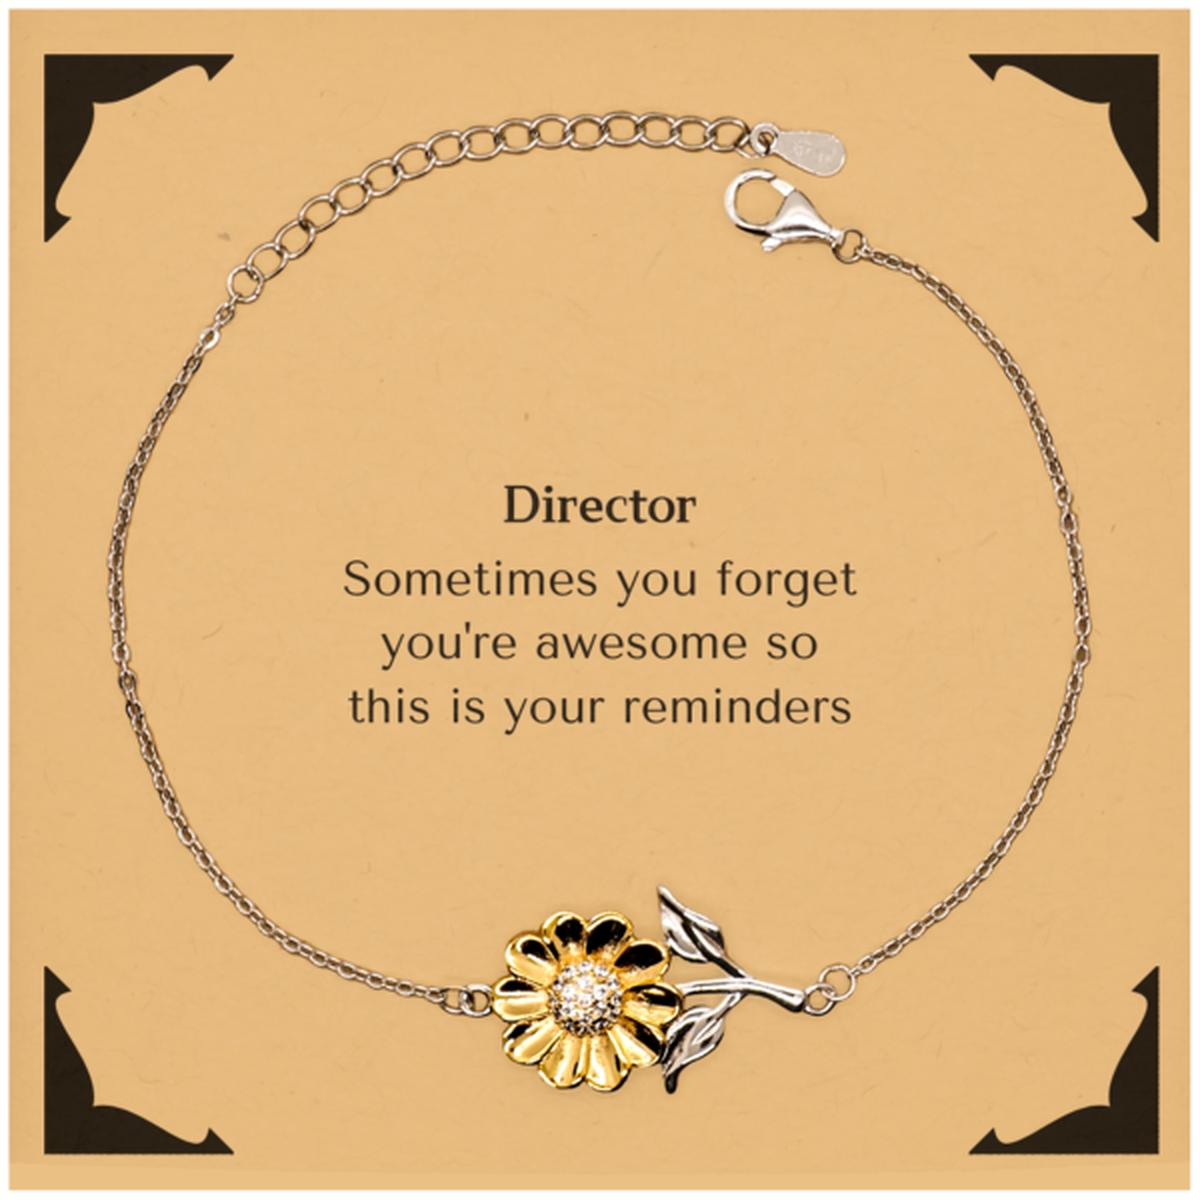 Sentimental Director Sunflower Bracelet, Director Sometimes you forget you're awesome so this is your reminders, Graduation Christmas Birthday Gifts for Director, Men, Women, Coworkers